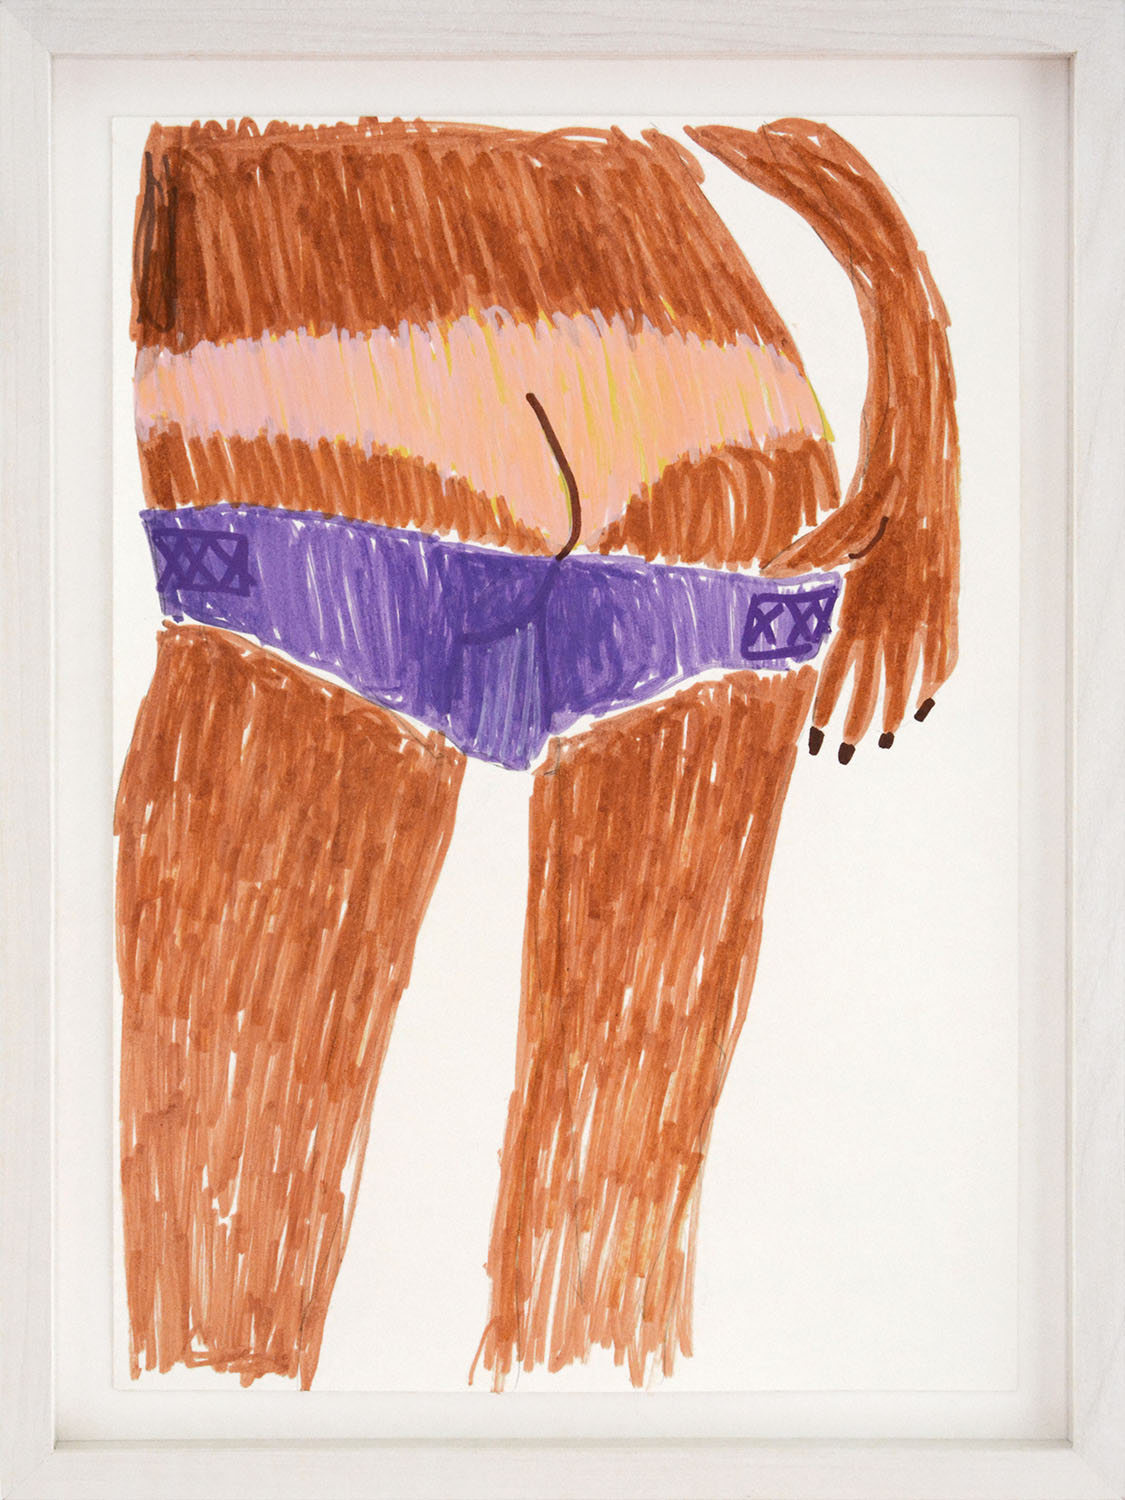 12_A4_katharina-arndt_my-tanned-butt_sketch_framed_1500px